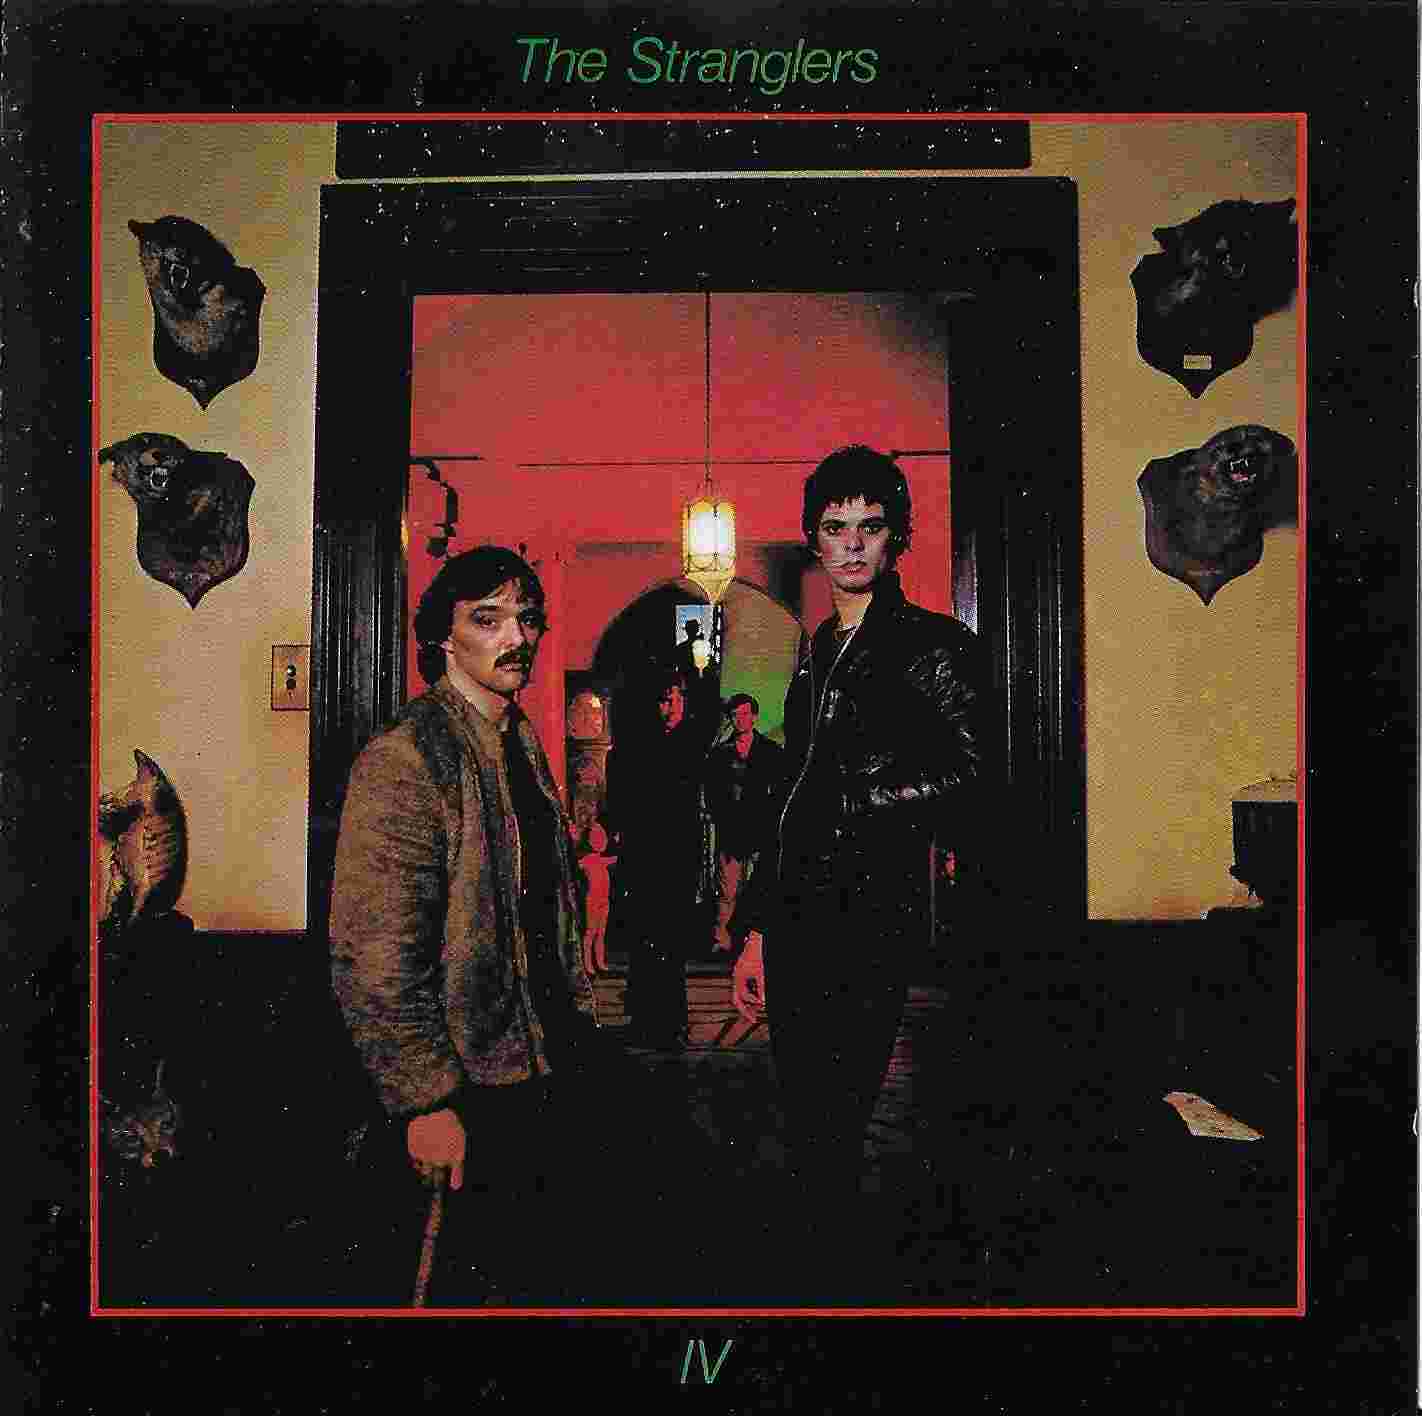 Picture of CDP 746362 2 Rattus norvegicus by artist The Stranglers from The Stranglers cds